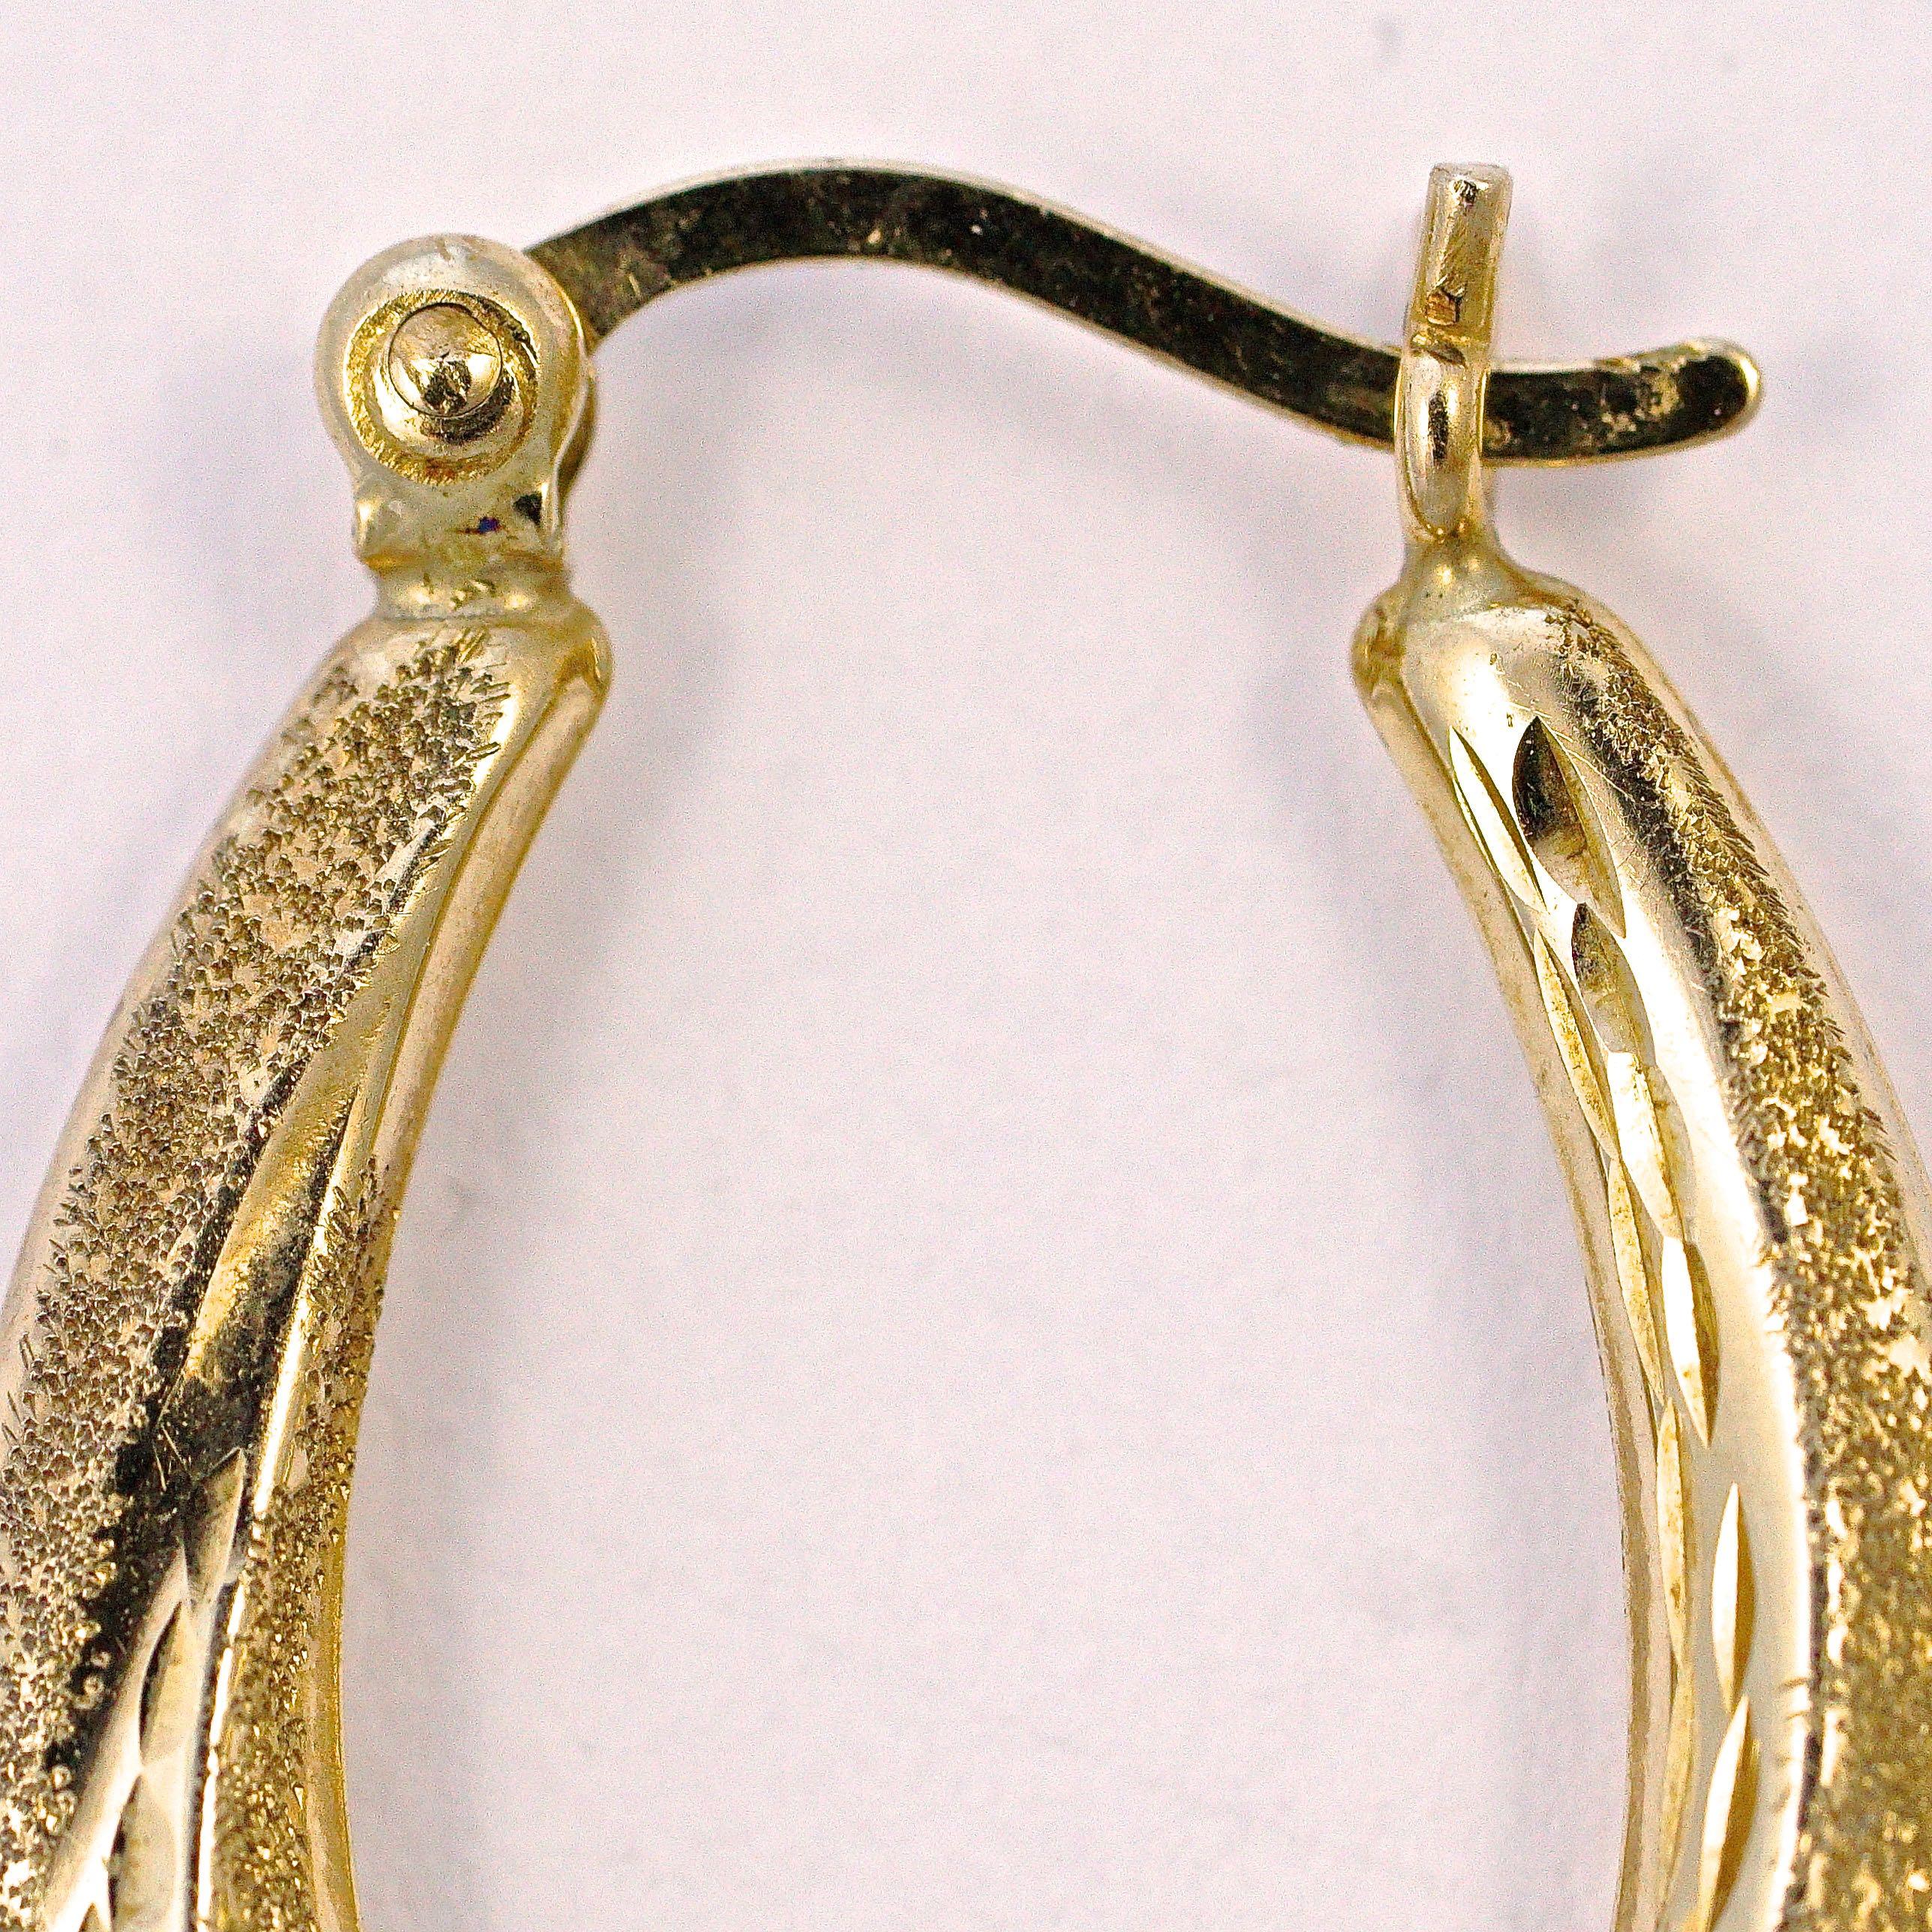 9ct gold earrings featuring wonderful textured and diamond cut oval hoops. Measuring length 2.45cm / .96 inch by width 1.65cm / .65 inch. The earrings are in very good condition.

This is a beautiful pair of vintage hoop earrings, perfect for